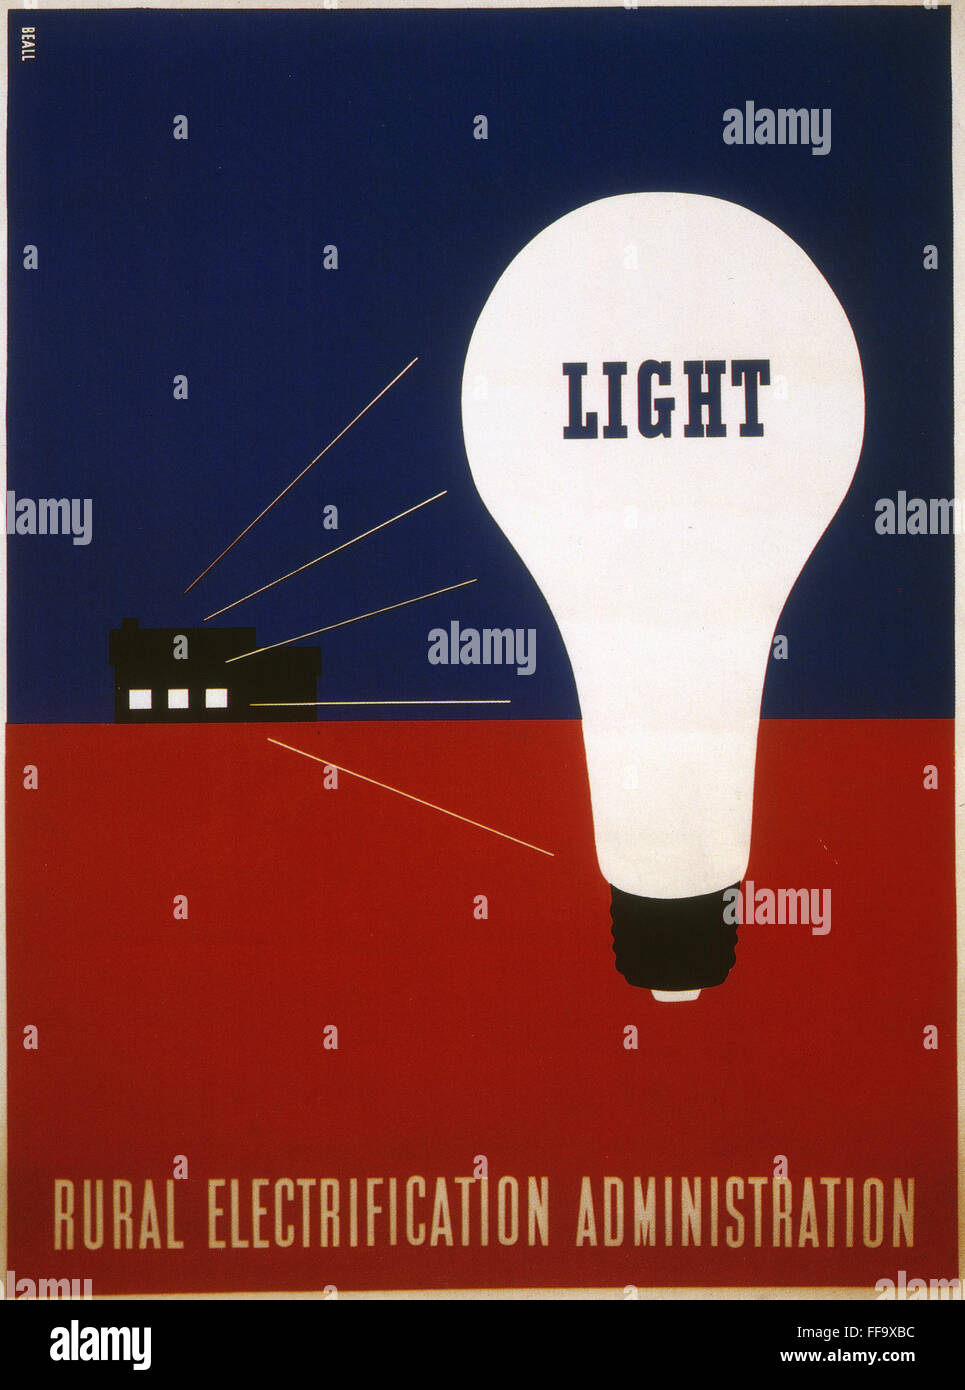 RURAL ELECTRIFICATION 1937. /nLight: American lithograph poster, 1937, by Lester Beal for the Rural Electrification Administration. Stock Photo